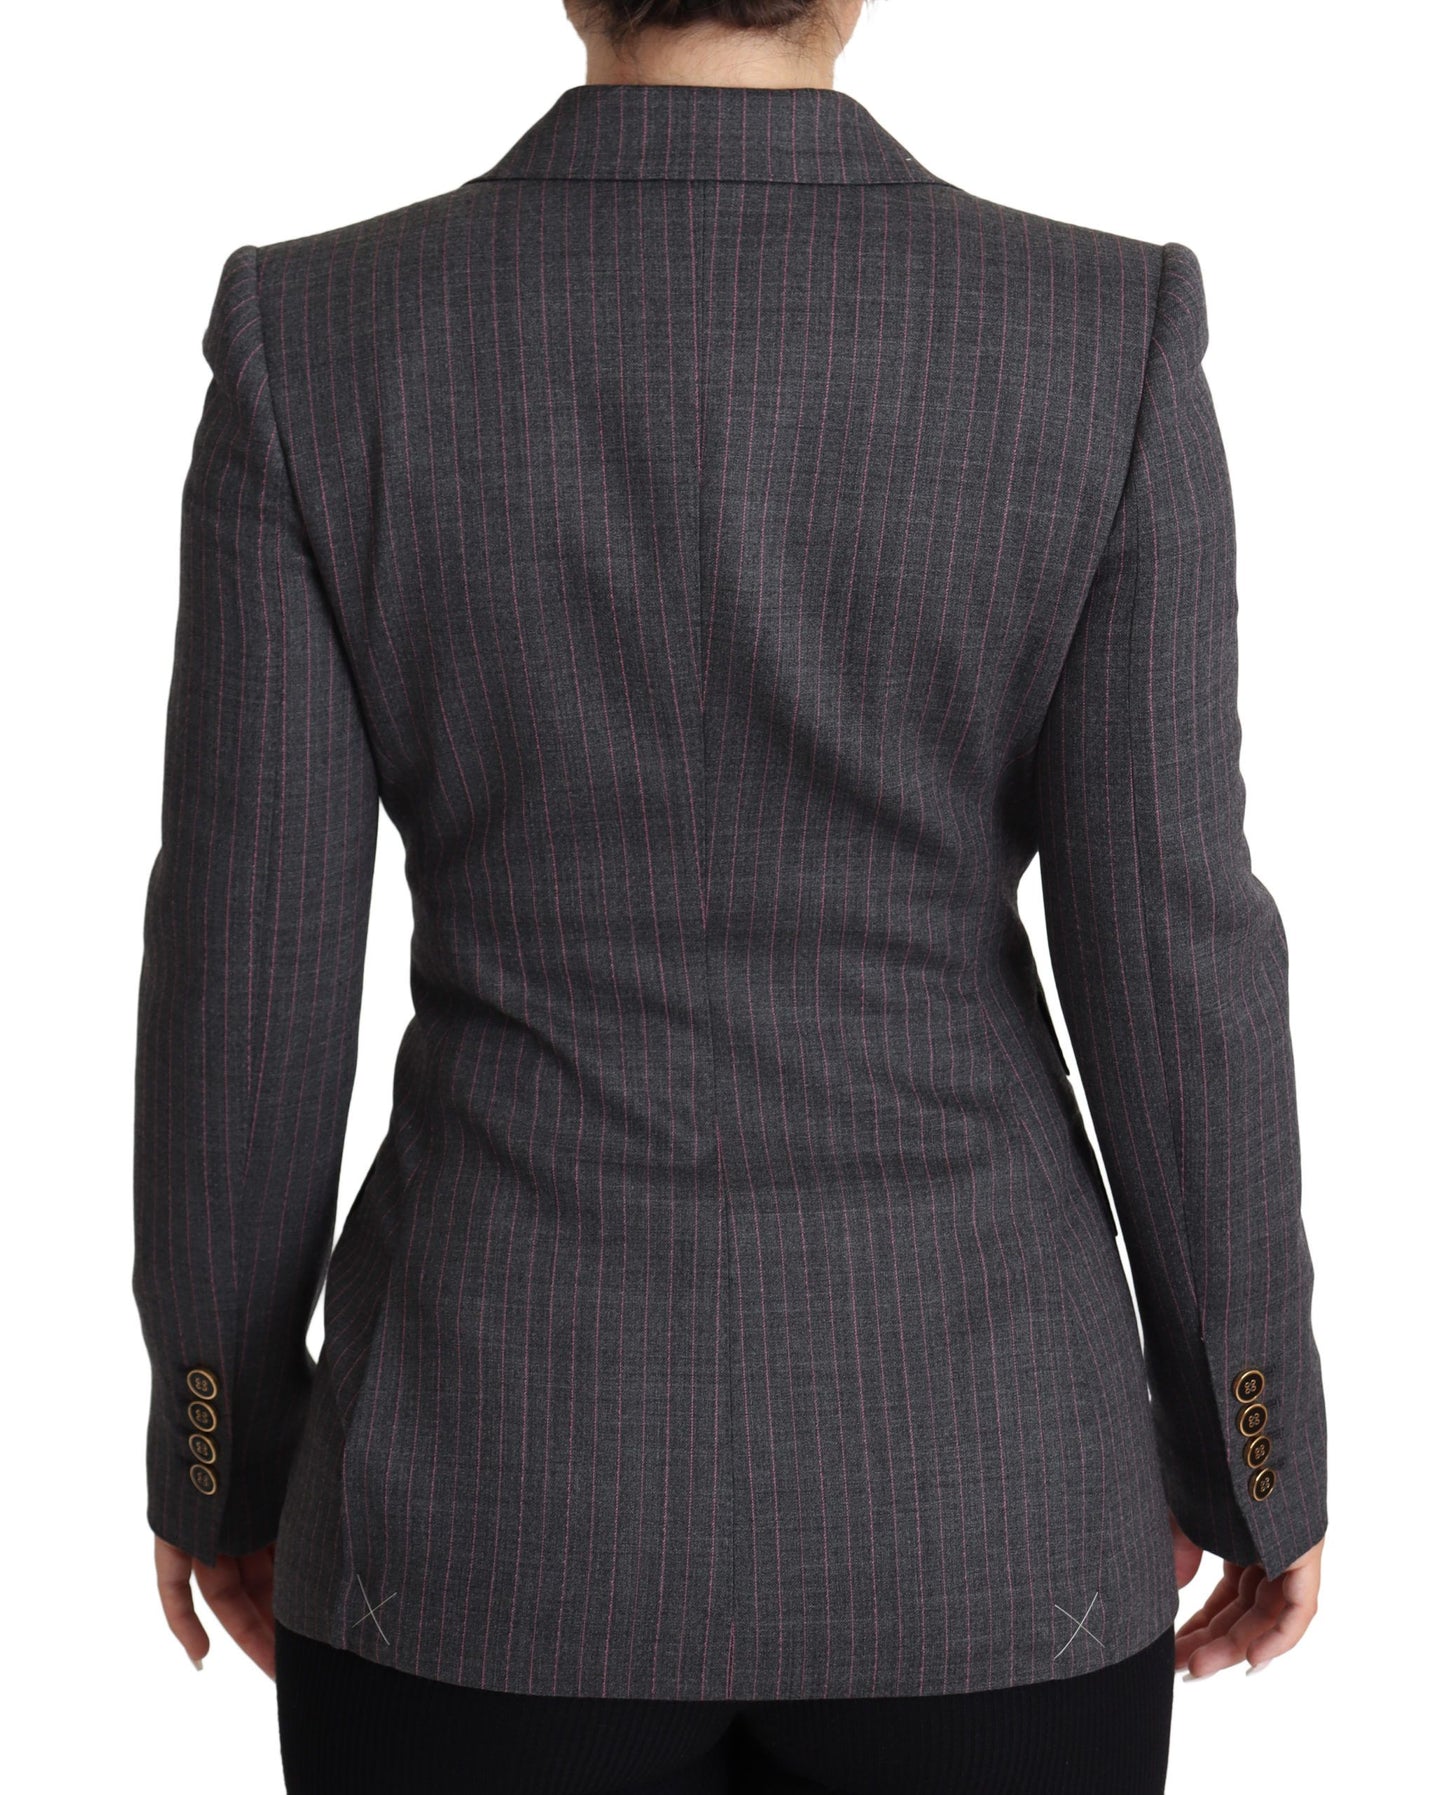 Dolce & Gabbana Gray Single Breasted Fitted Blazer Wool Jacket